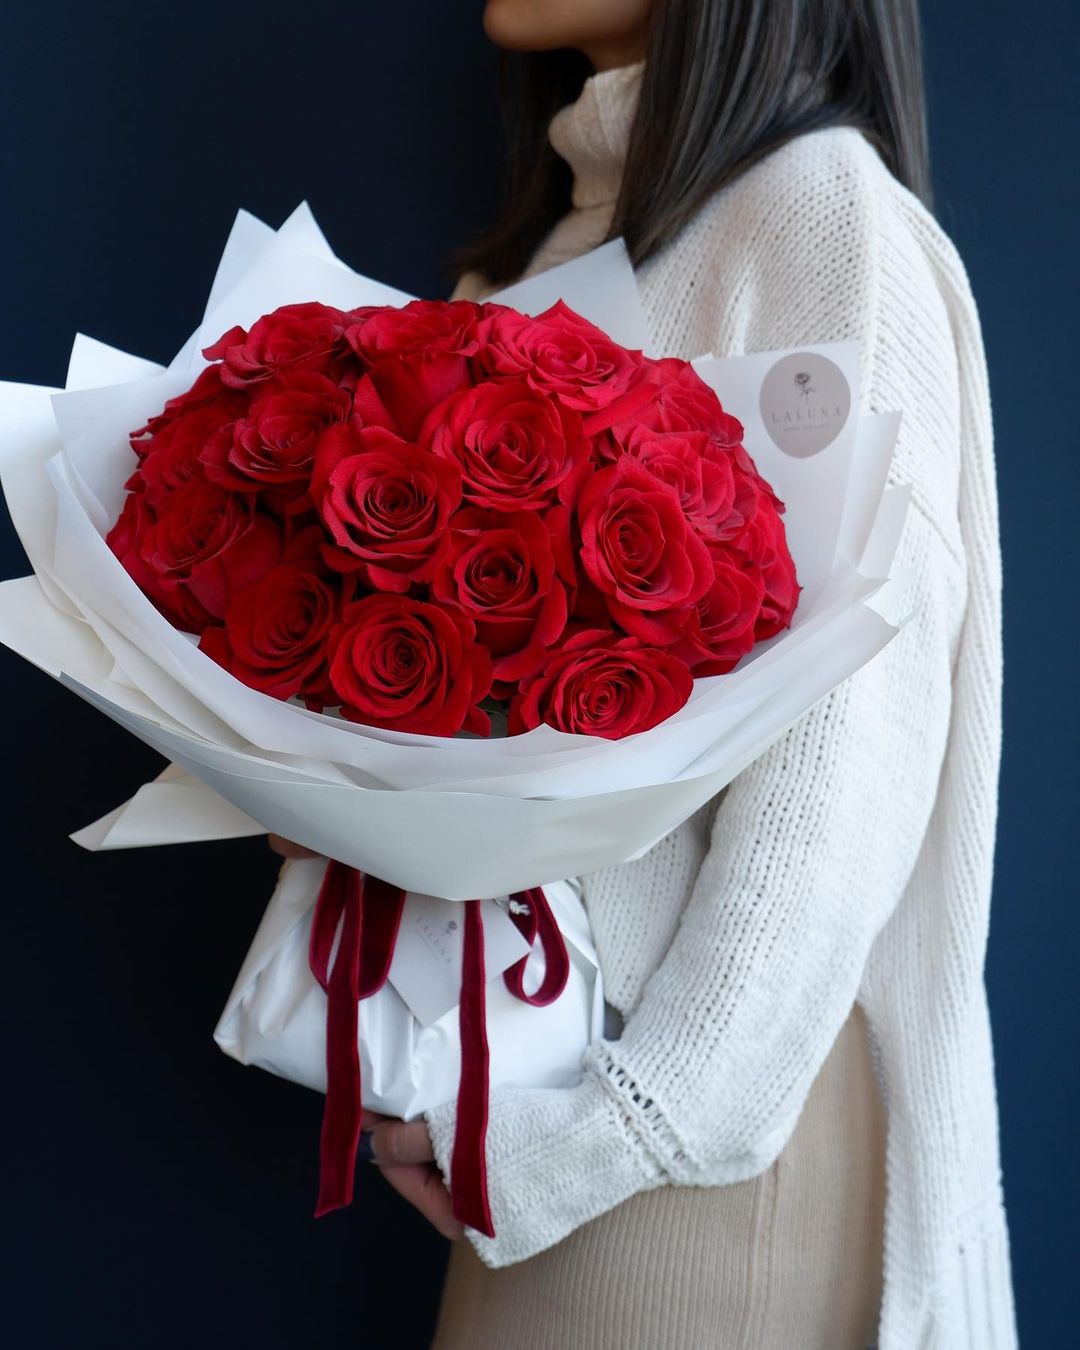 What is Valentine's Day 2022 Going to Bring Us? Red Roses